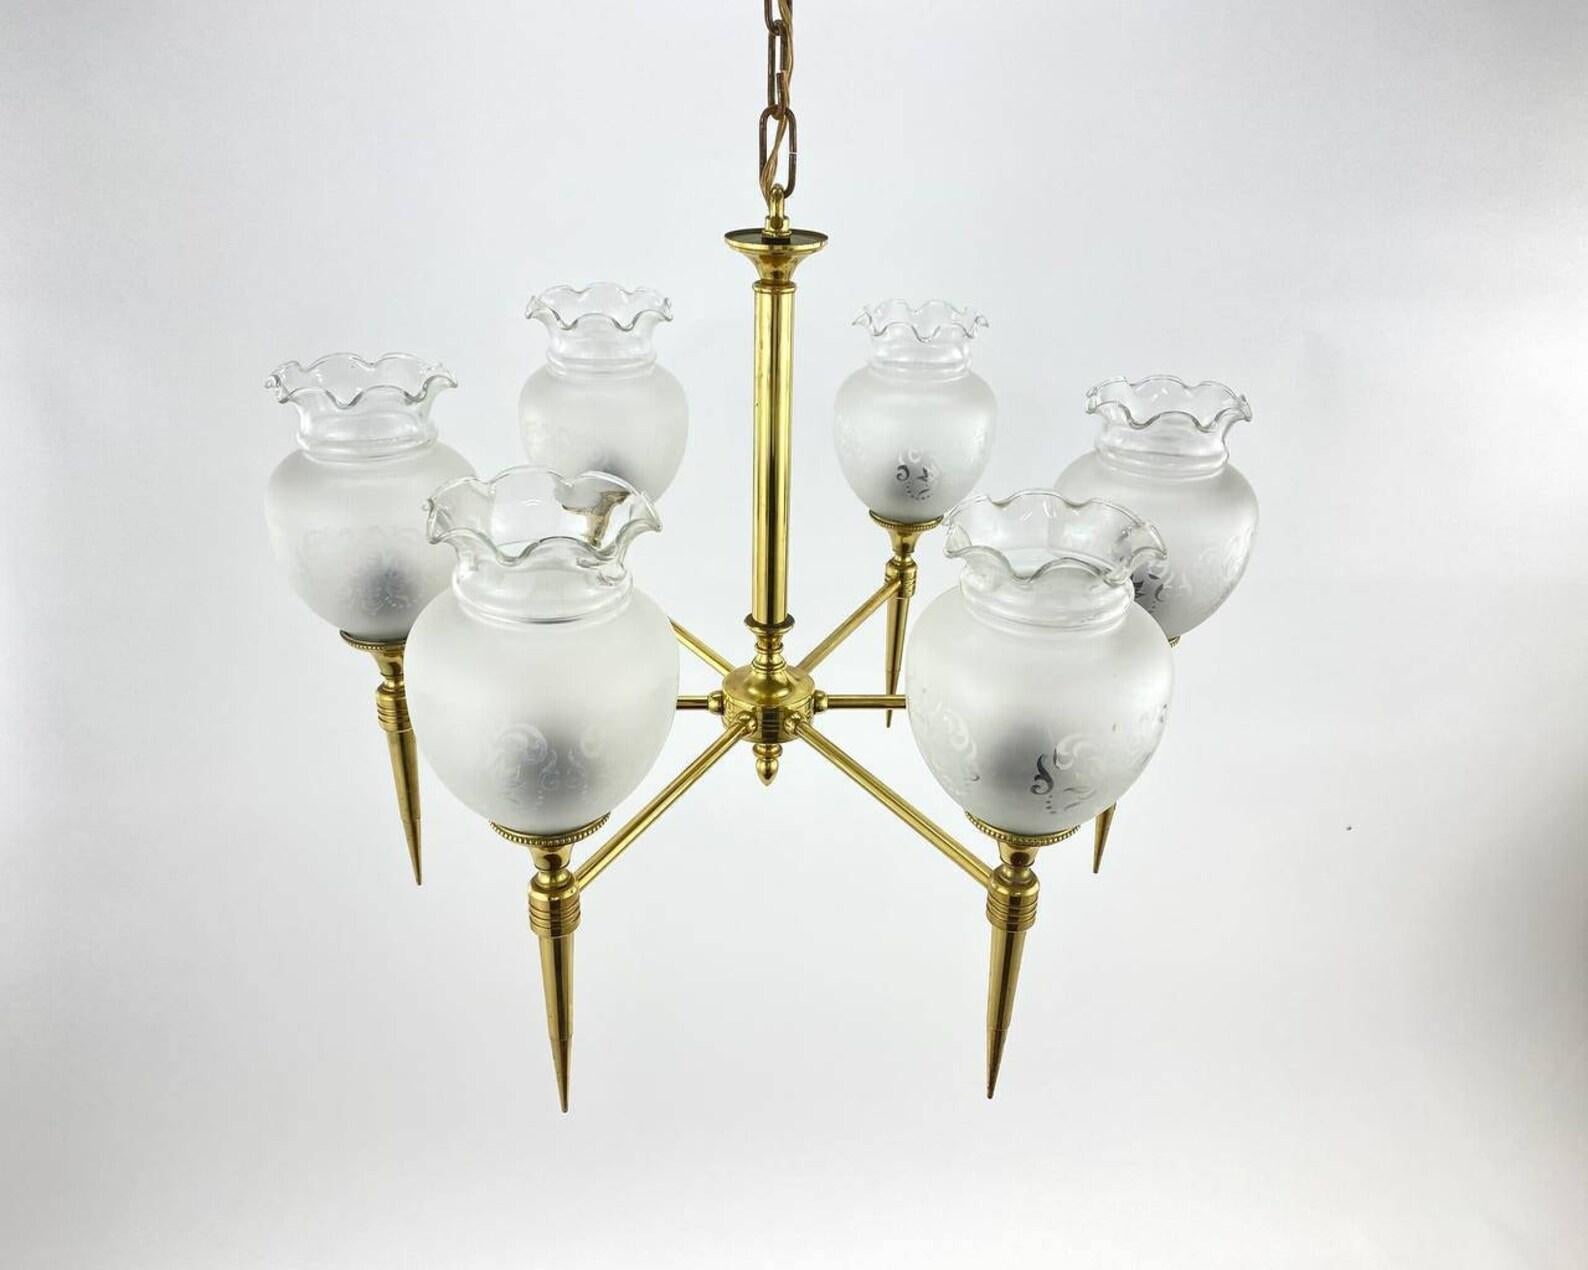 Vintage 6 Light Chandelier Brass and Frosted Glass Ceiling Lamp, France, 1970 For Sale 1